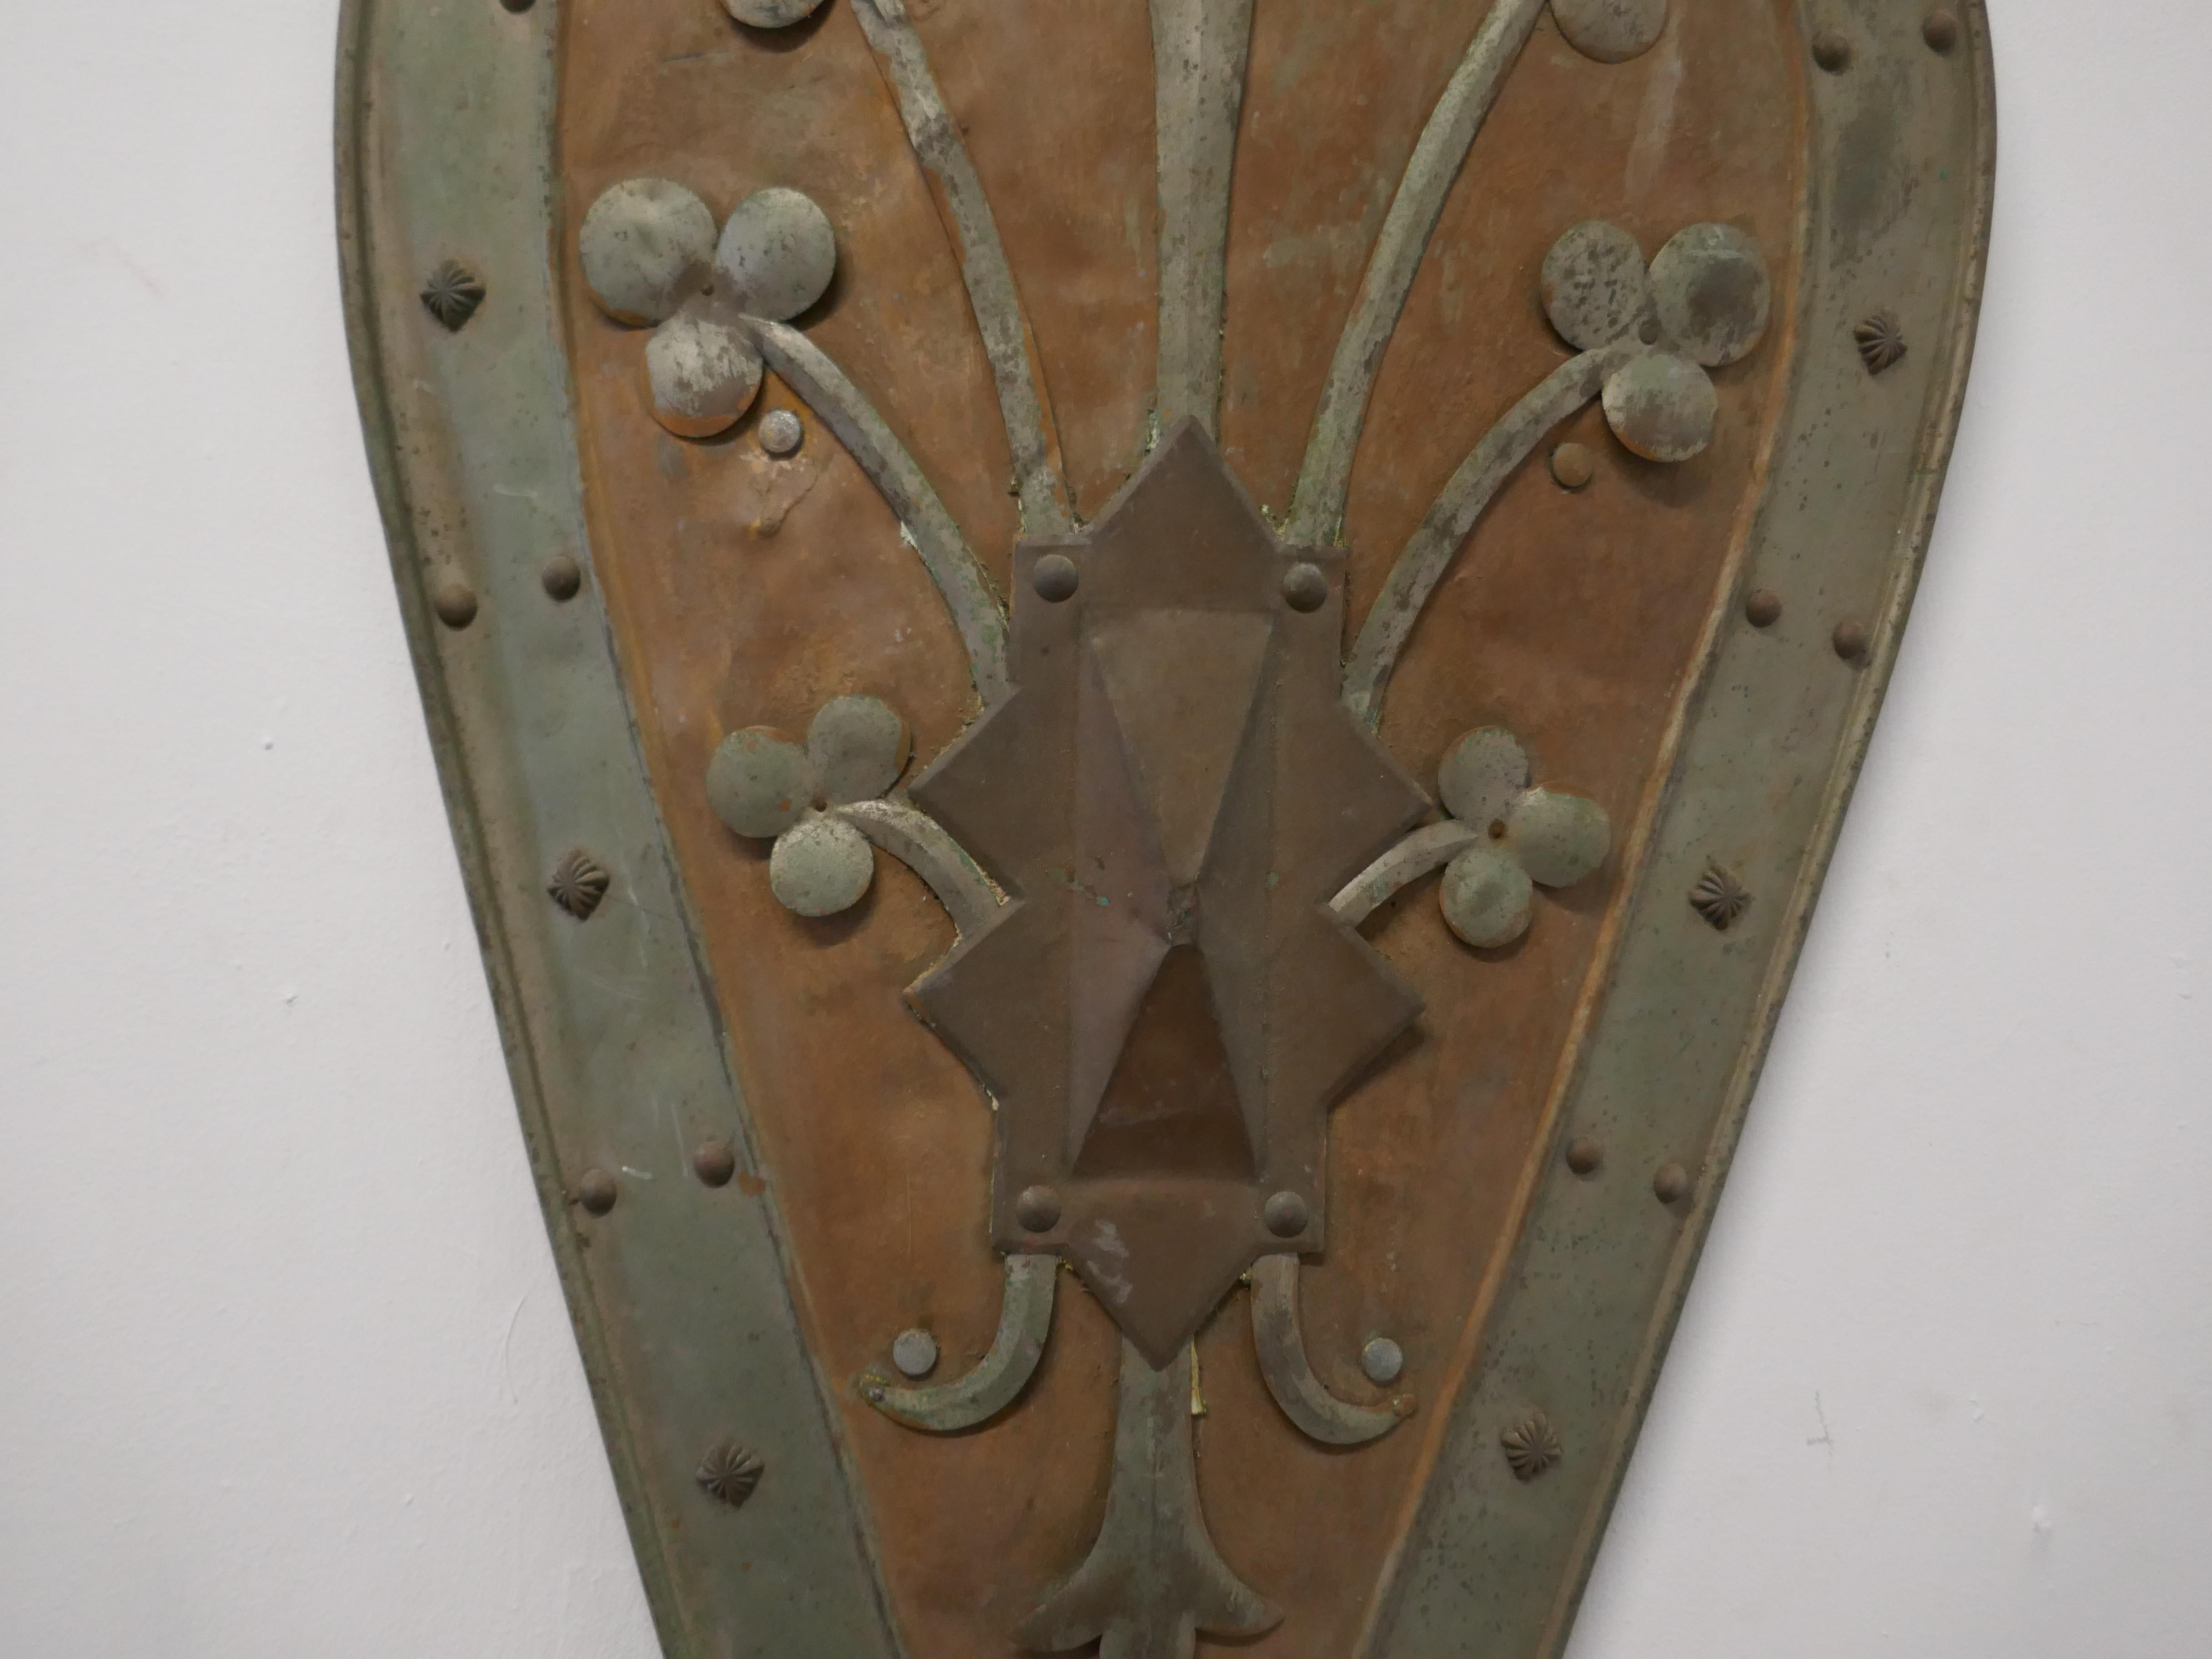 19th century French Arts & Crafts handmade kite shield

An unusual piece made in France in the Arts & Crafts style, can be wall hung, the shield is curved and Kite Shaped, it is decorated with fleurs-de-lis and has iron studs in the border
The